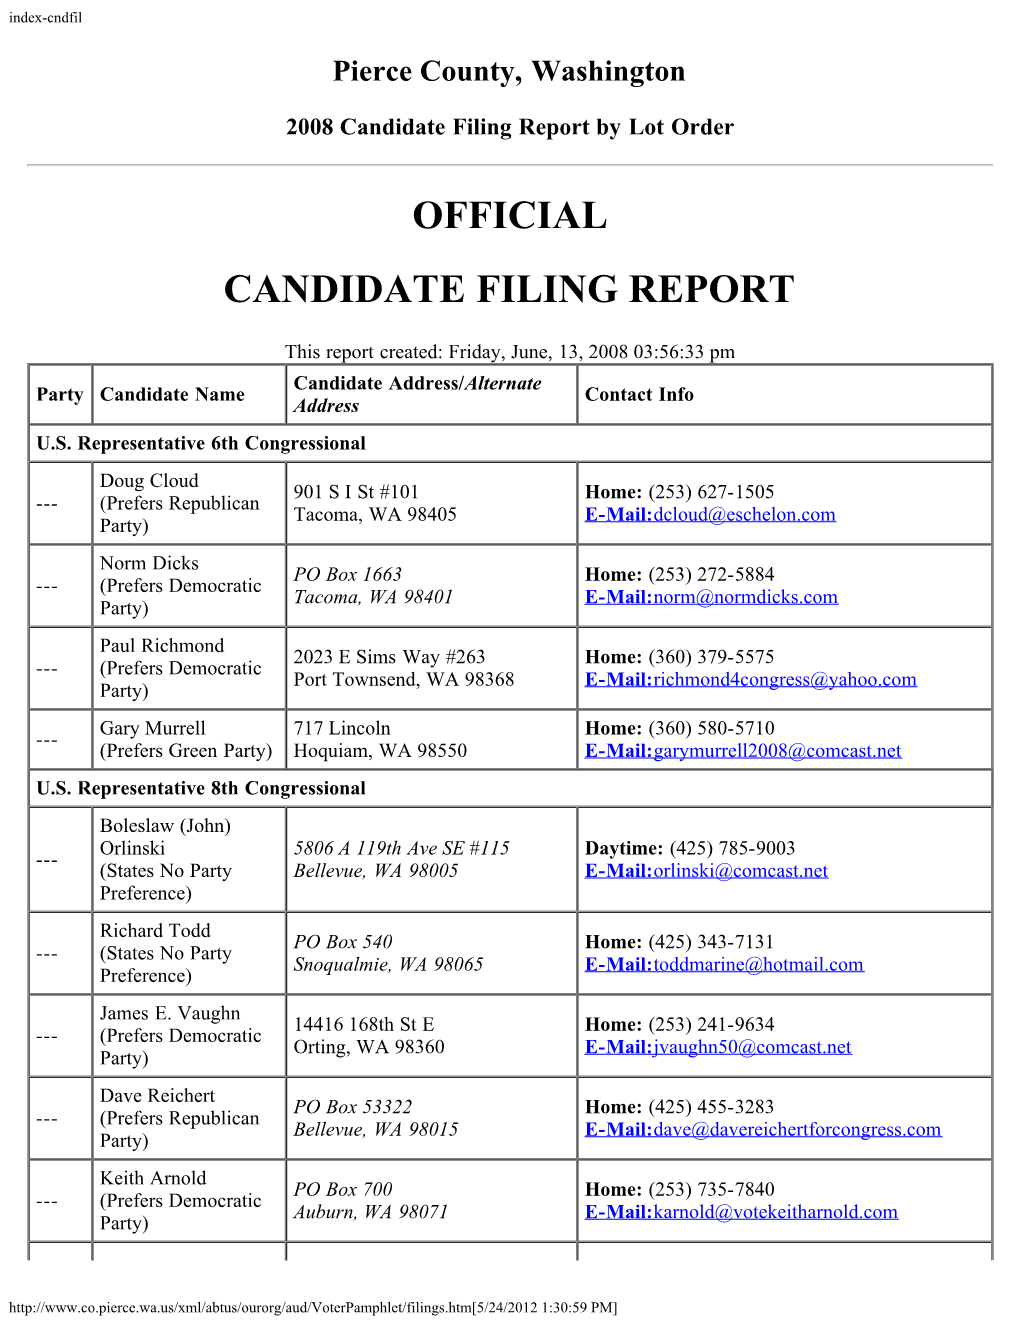 Official Candidate Filing Report